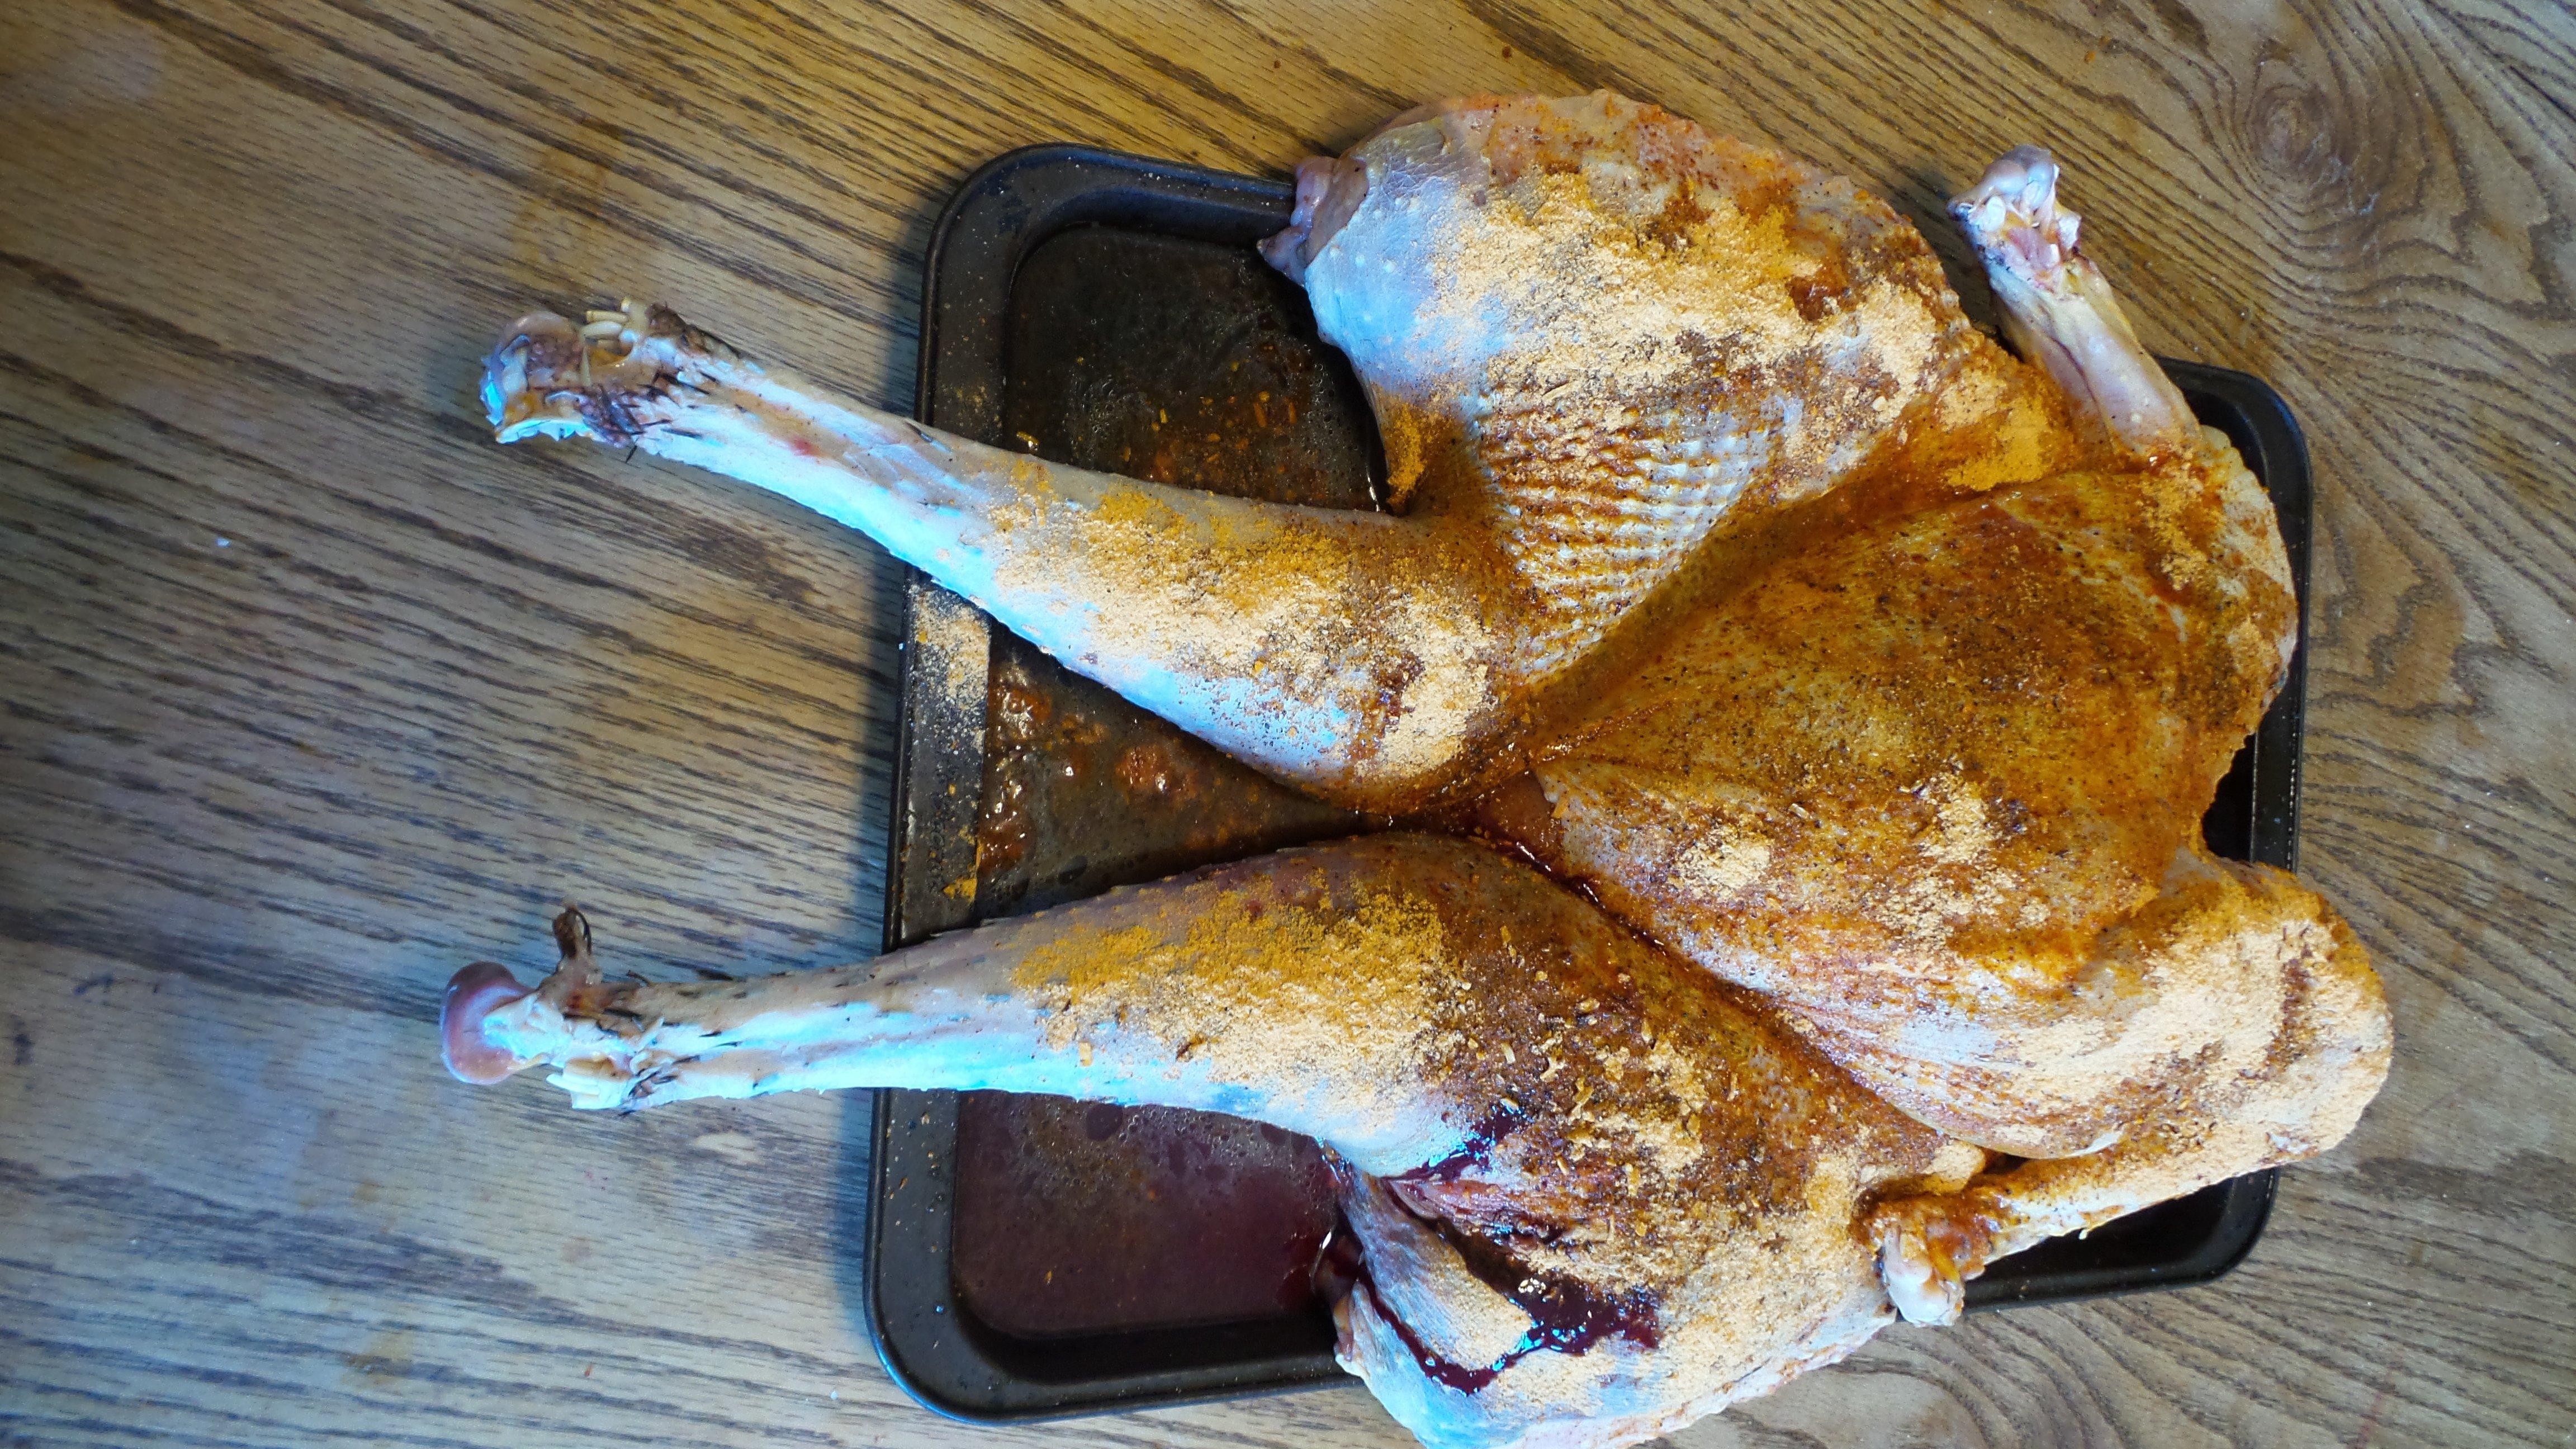 Rub the spatchcocked bird with olive oil and coat with your favorite BBQ rub.